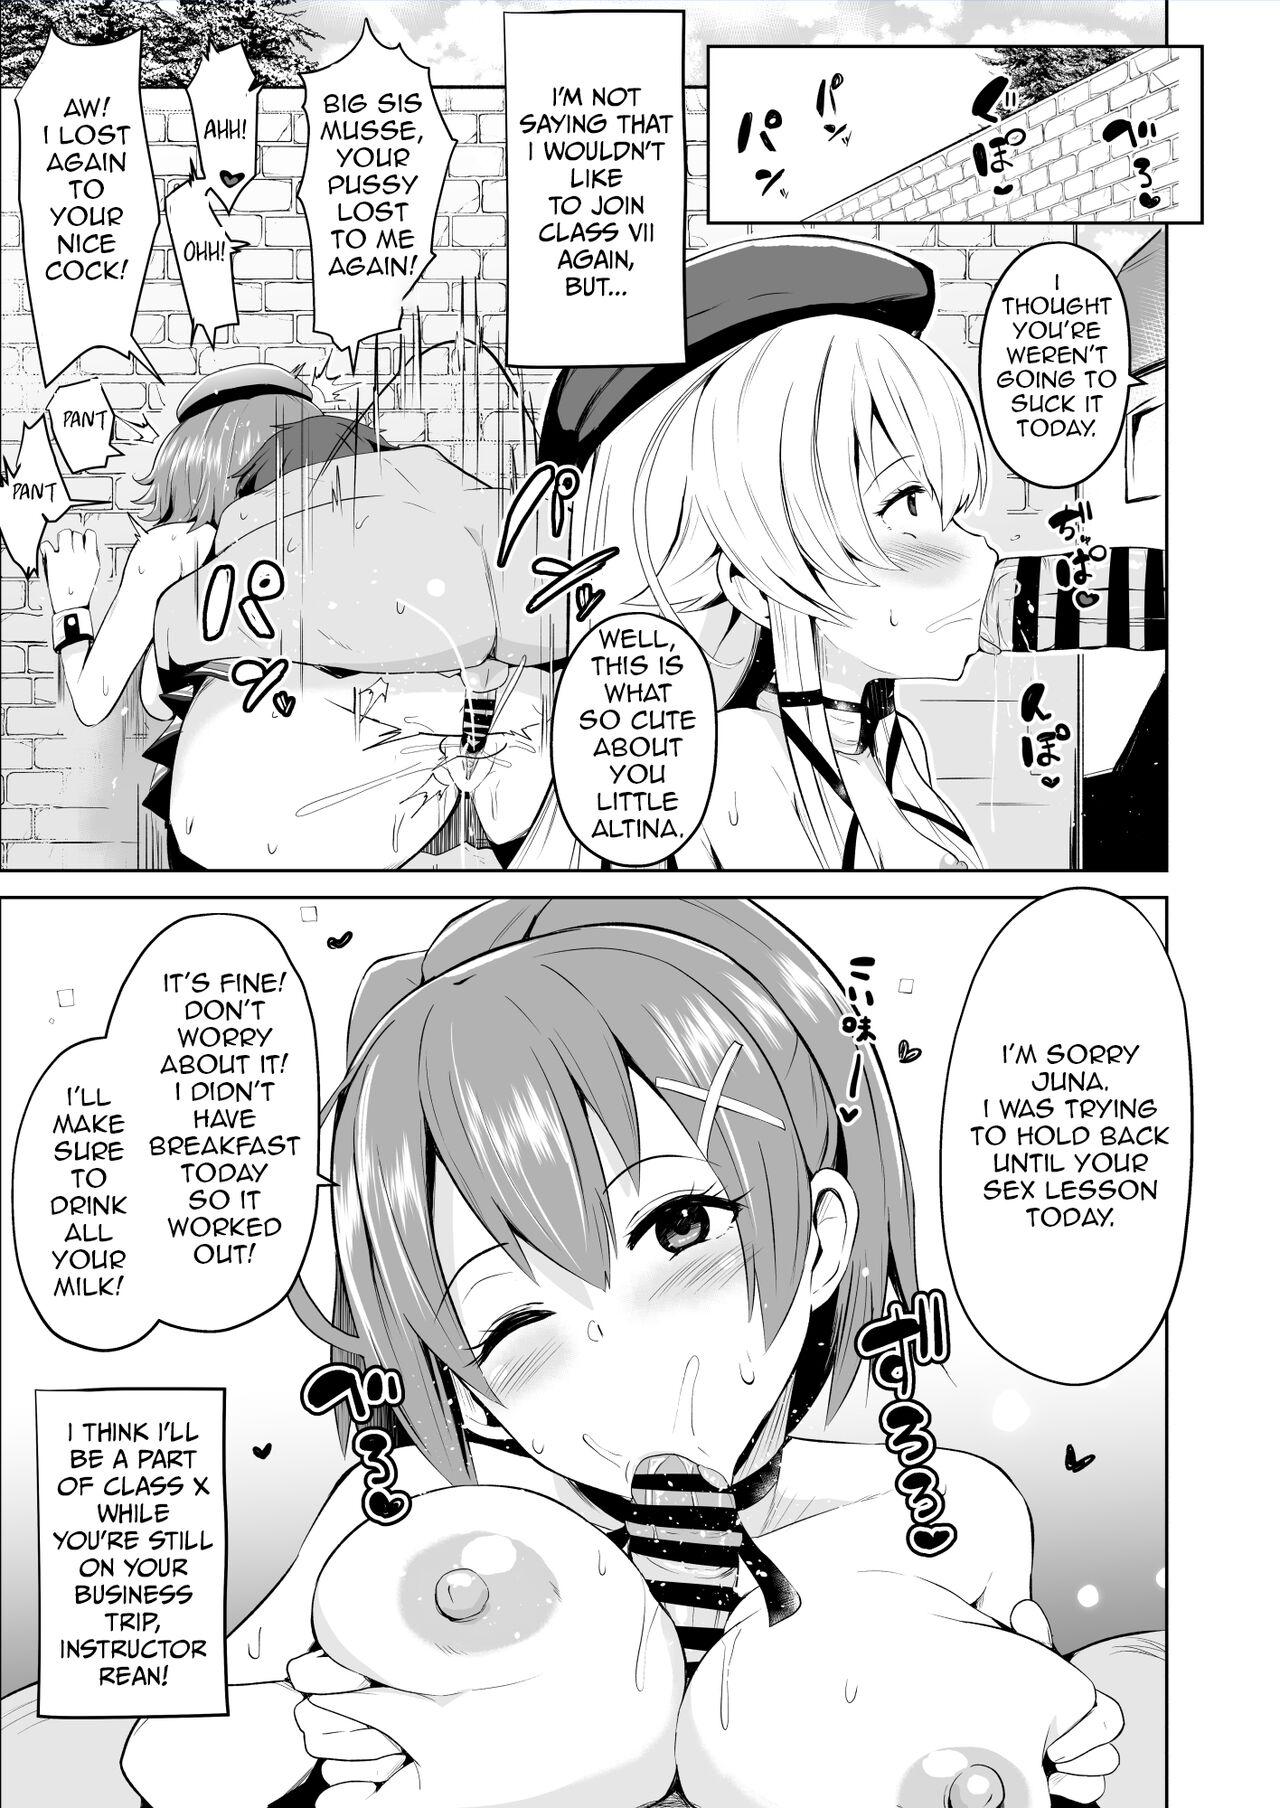 Police Hypnosis of the New Class VII - The legend of heroes | eiyuu densetsu Gay Pornstar - Page 8